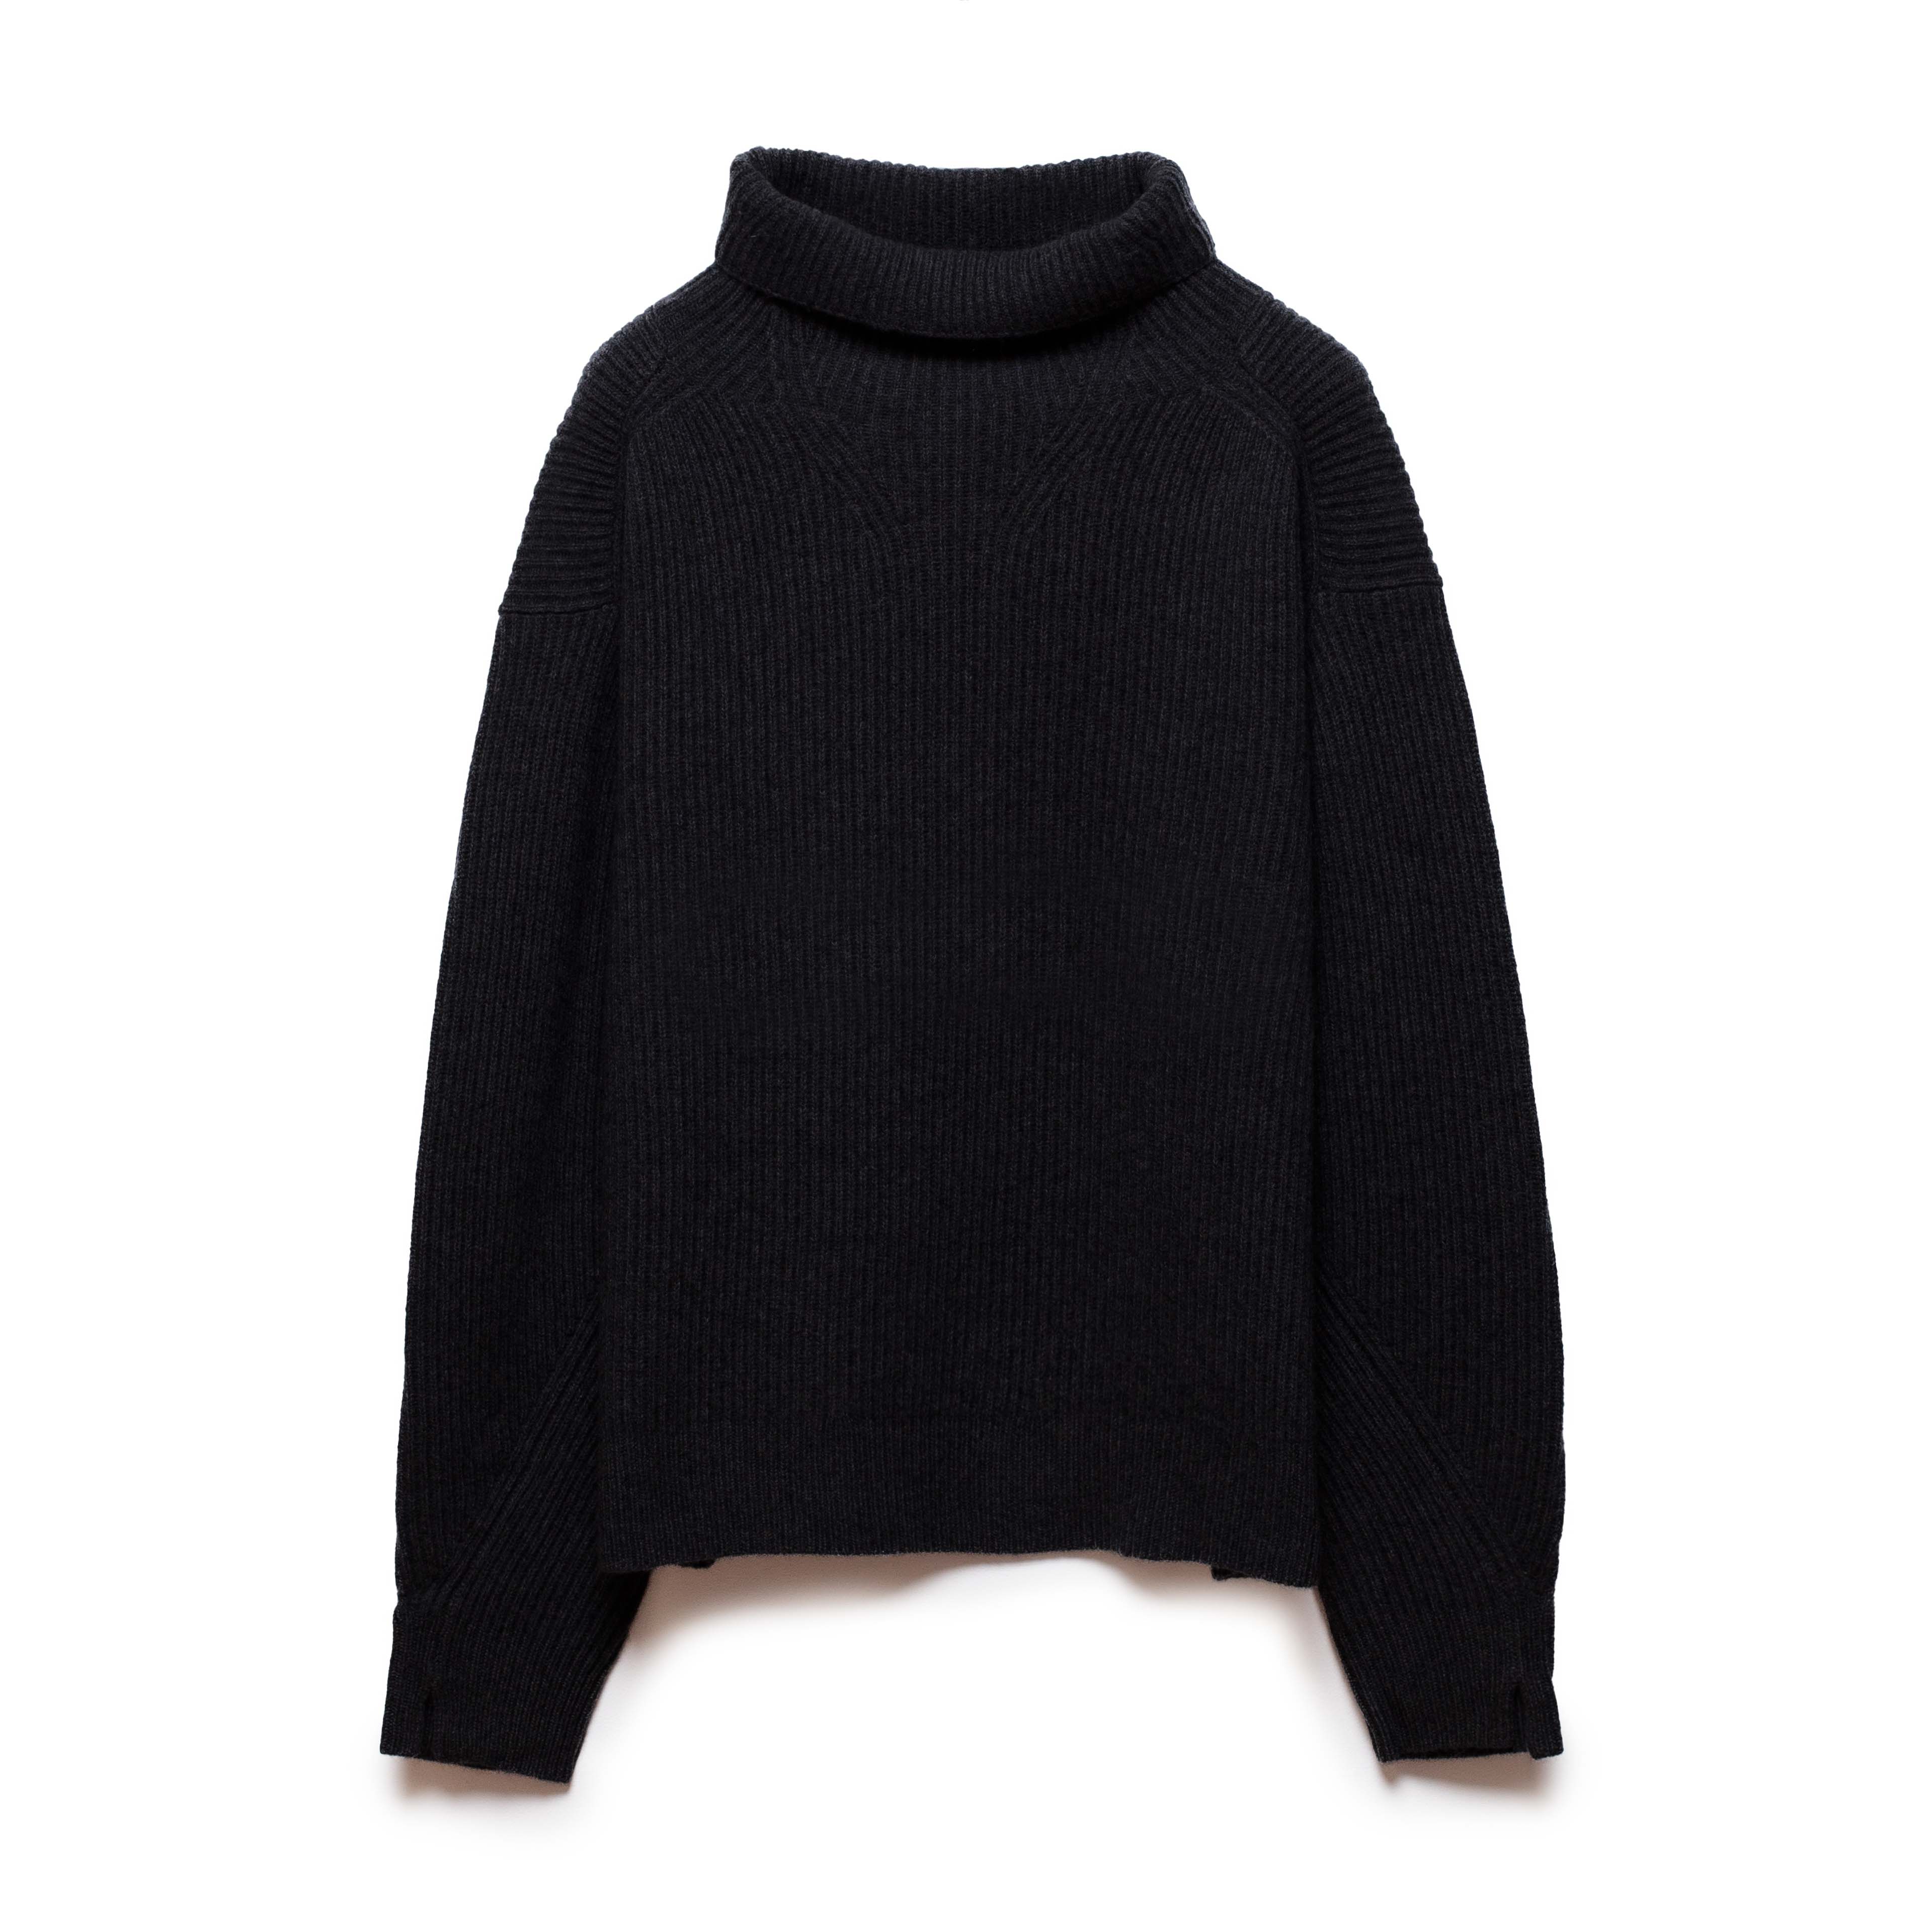 Black Turtleneck Cashmere and Wool